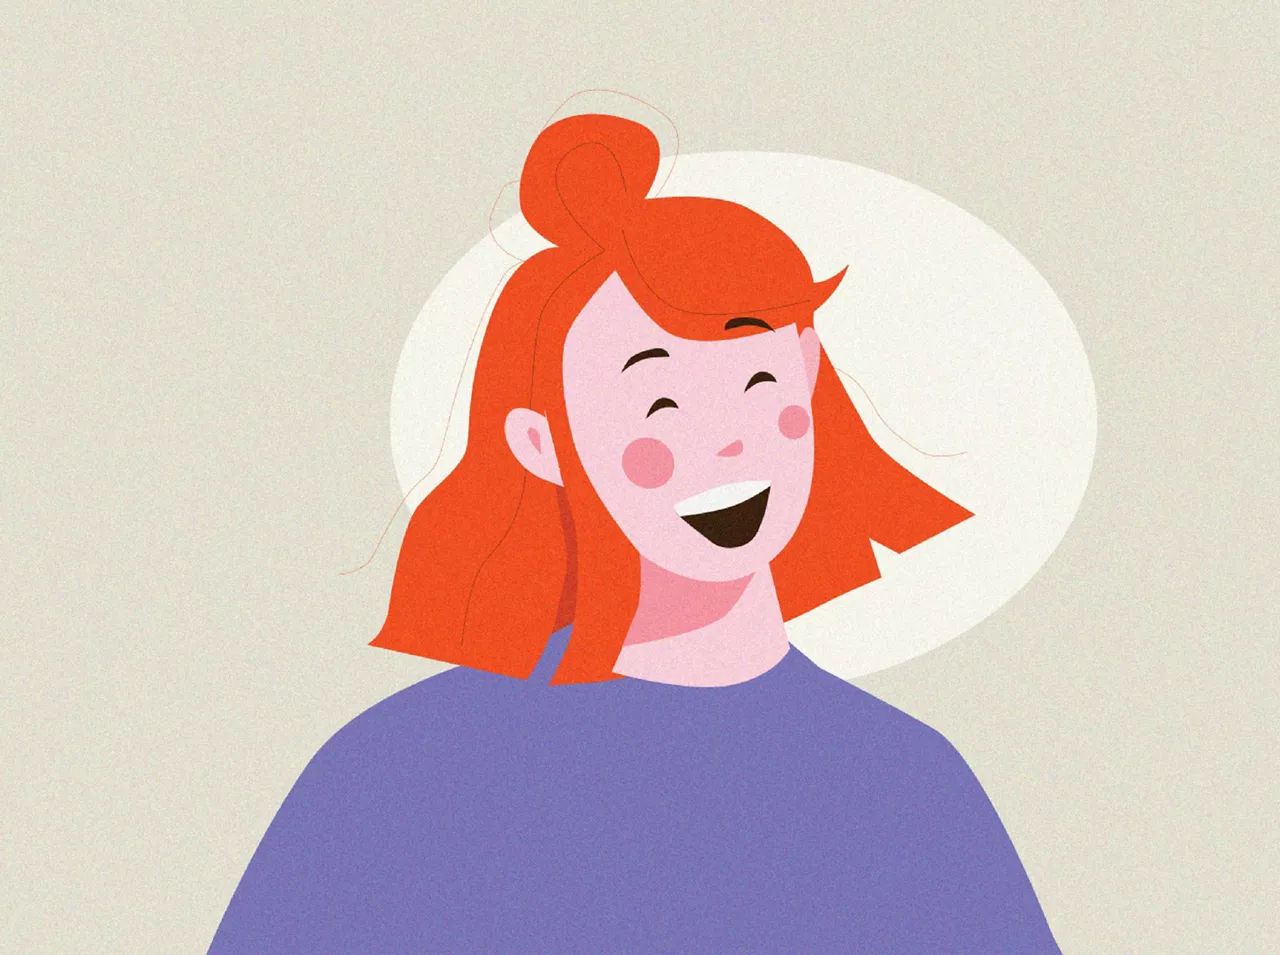 Illustration of individual with red hair smiling